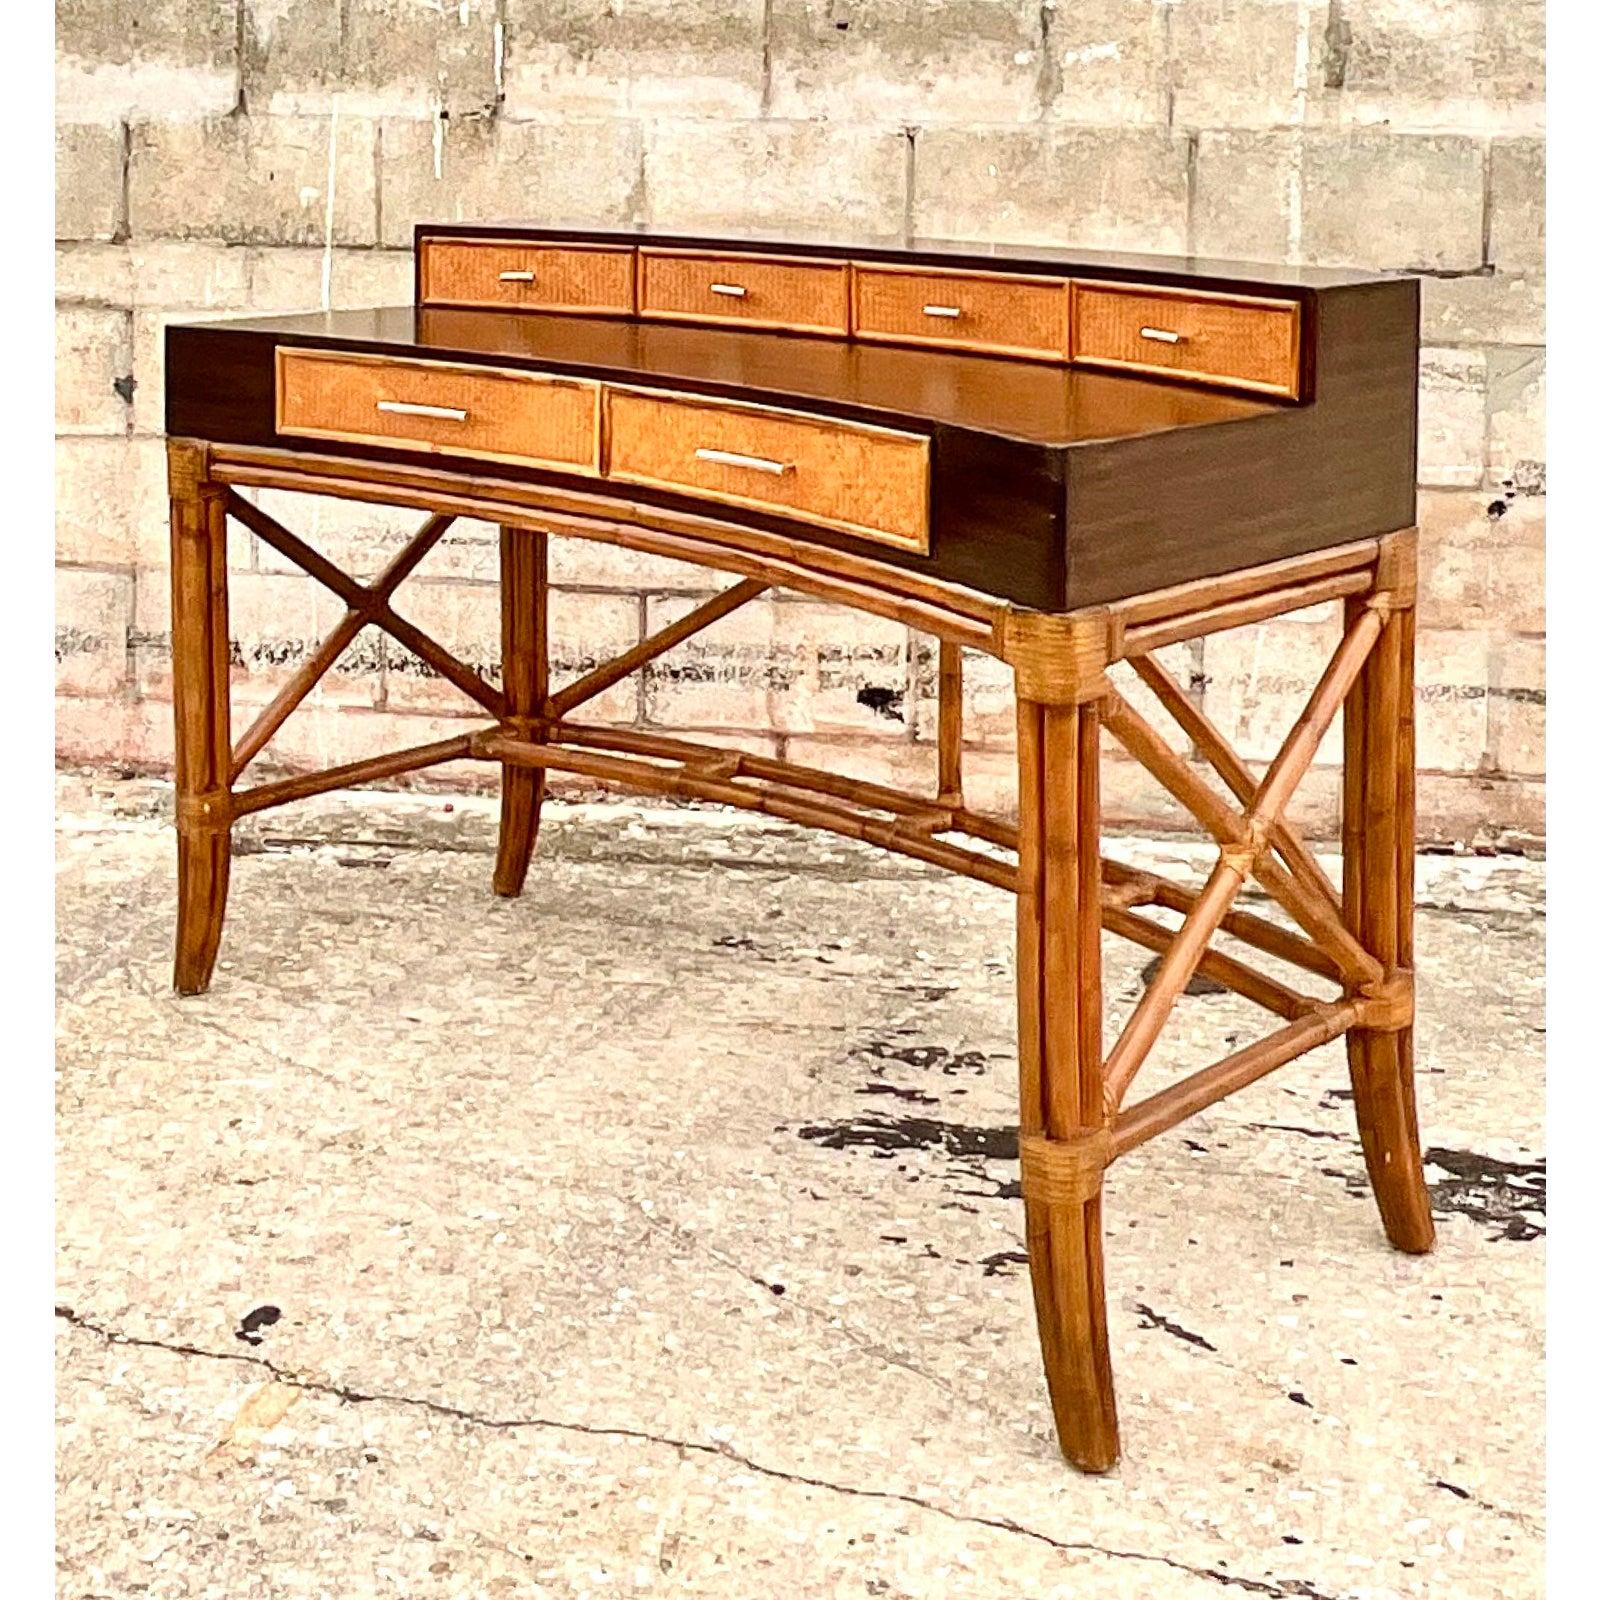 A fabulous vintage Coastal writing desk. Ebony wood cabinet with inset woven rattan panels. Rests on bent rattan base. Chic and glamorous. Acquired from a Palm Beach estate.